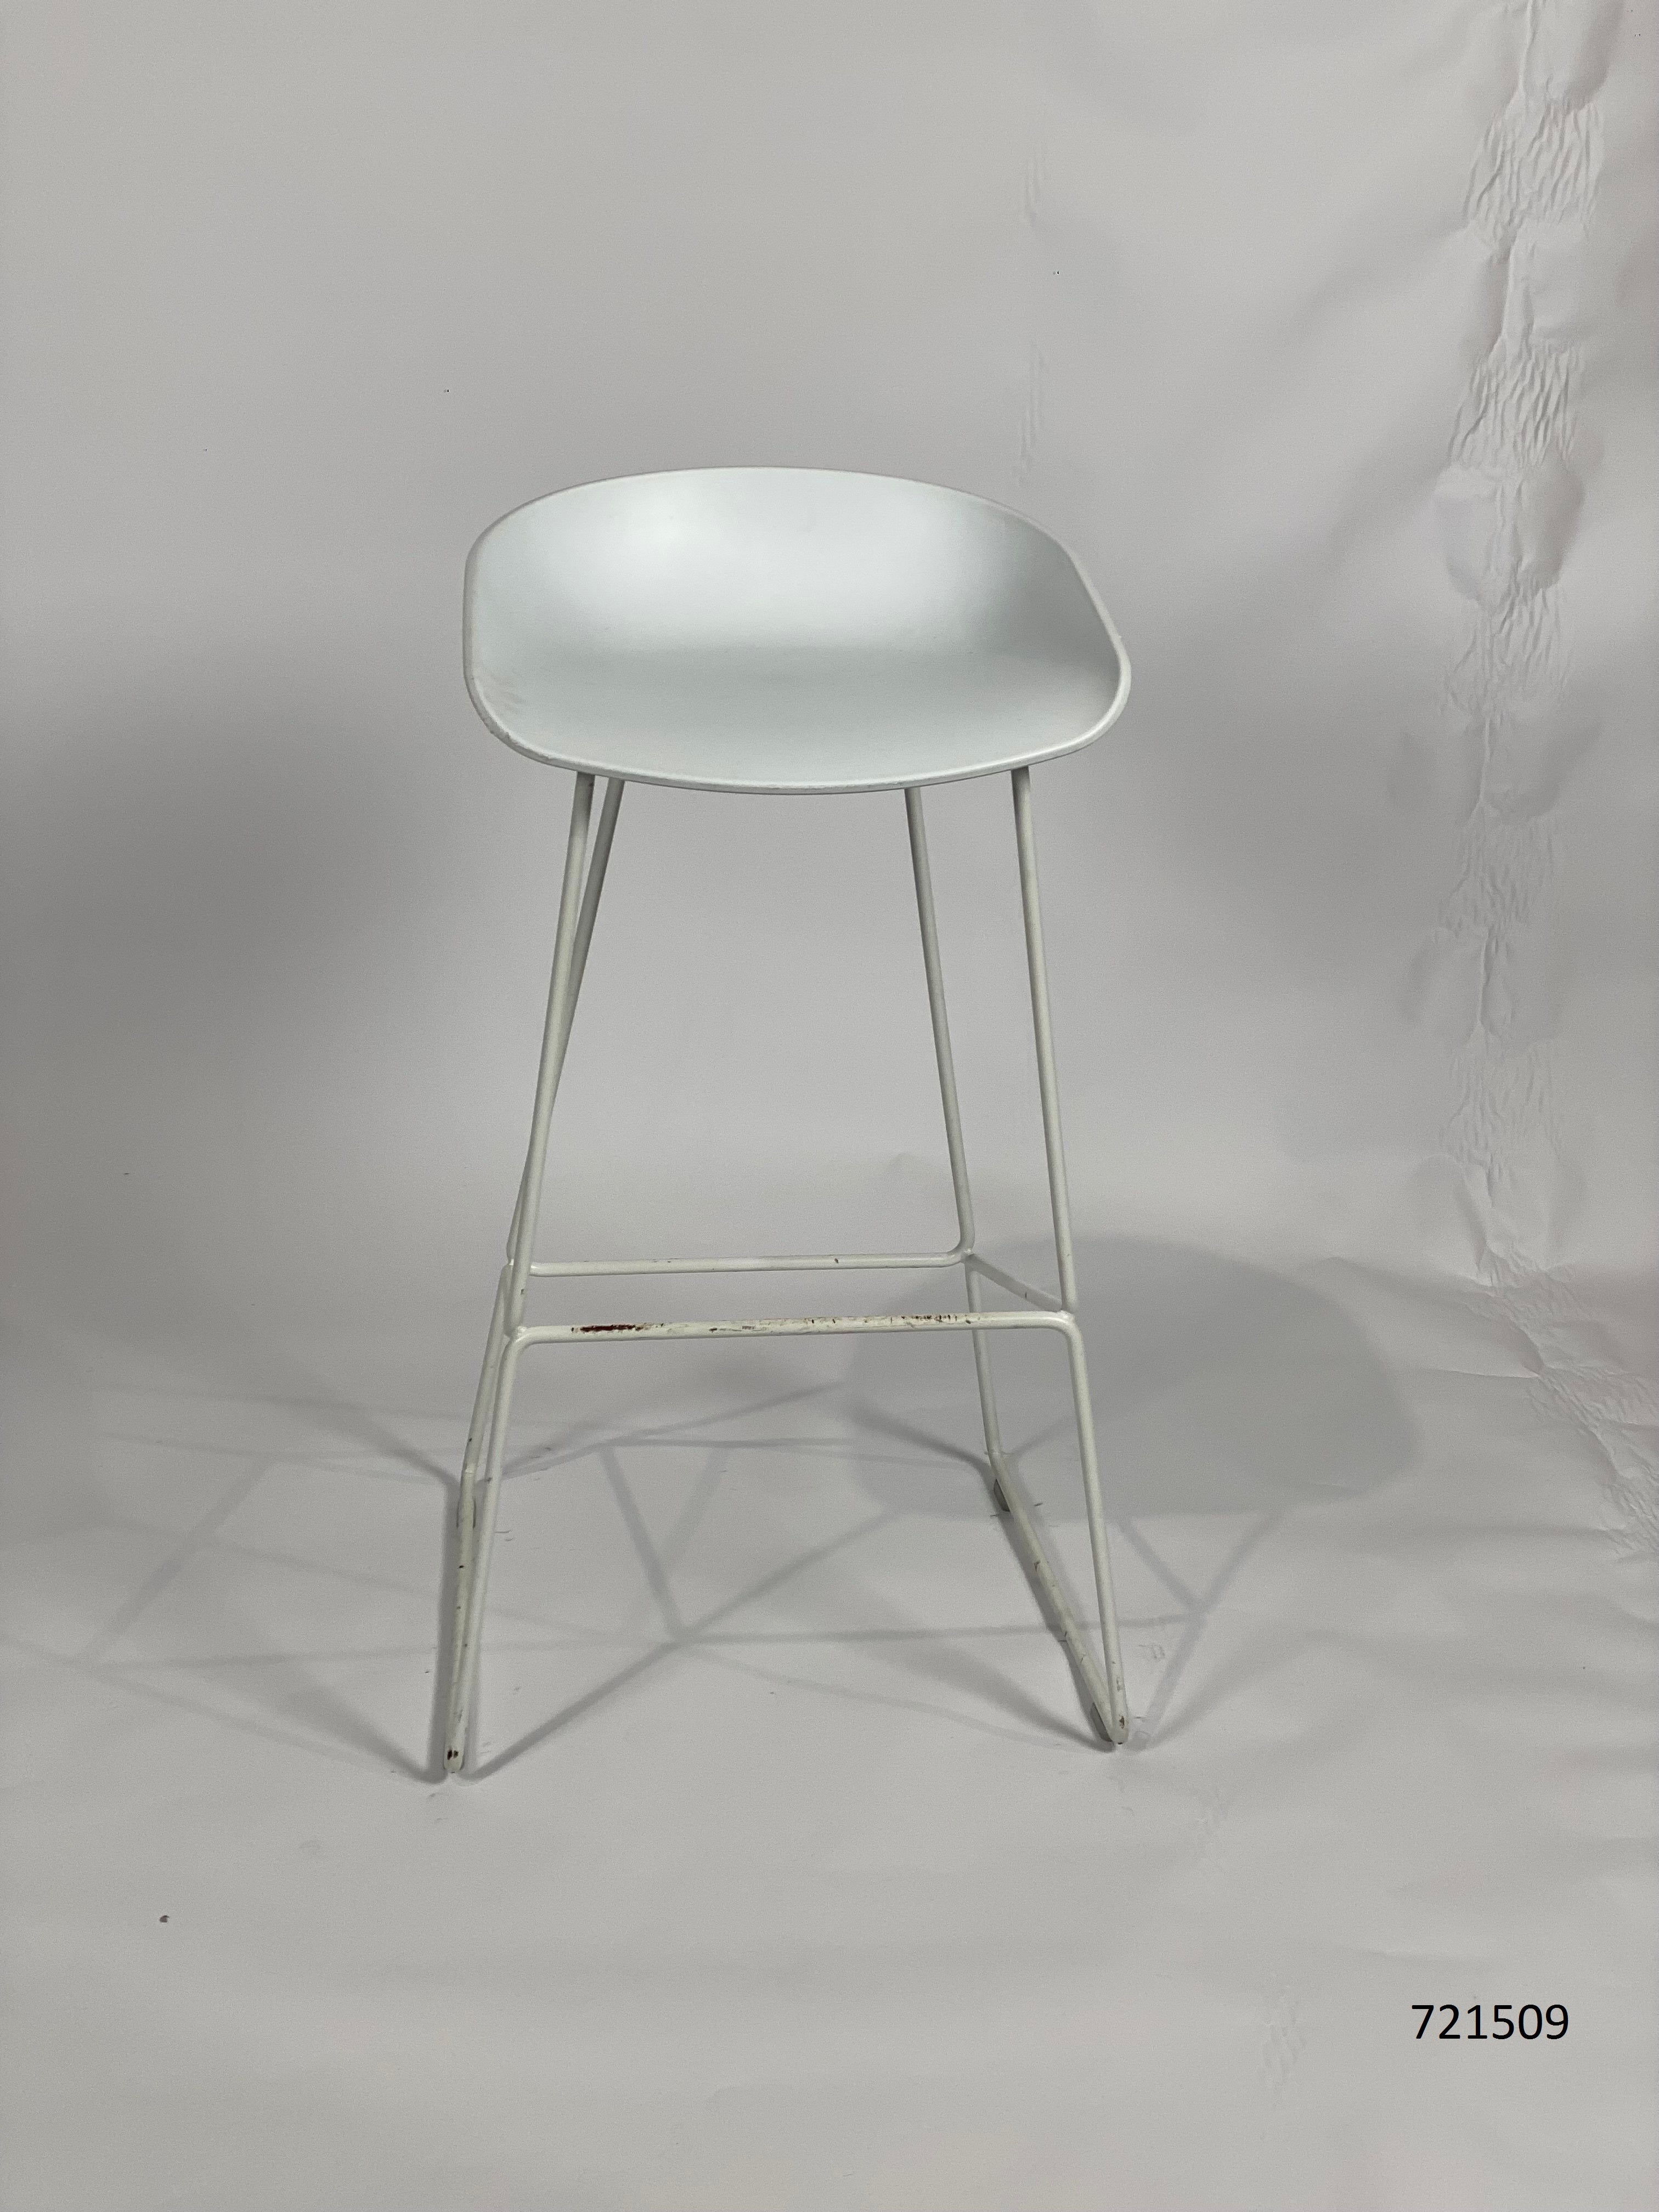 About A Stool AAS38 75cm